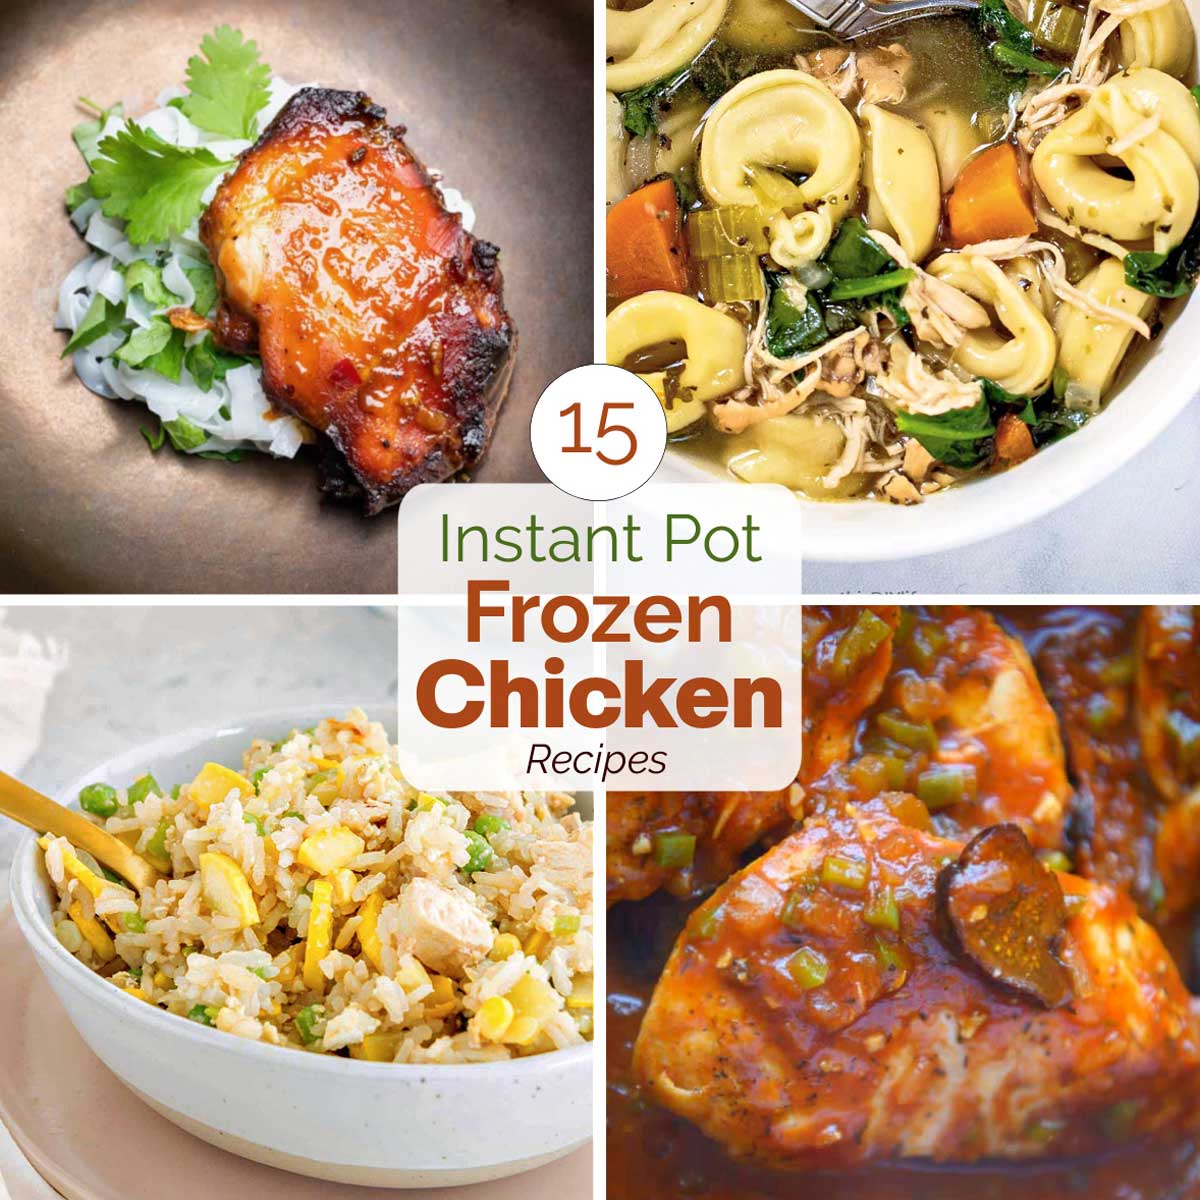 Square collage of 4 recipes with central text in brown and green "15 Instant Pot Frozen Chicken Recipes"